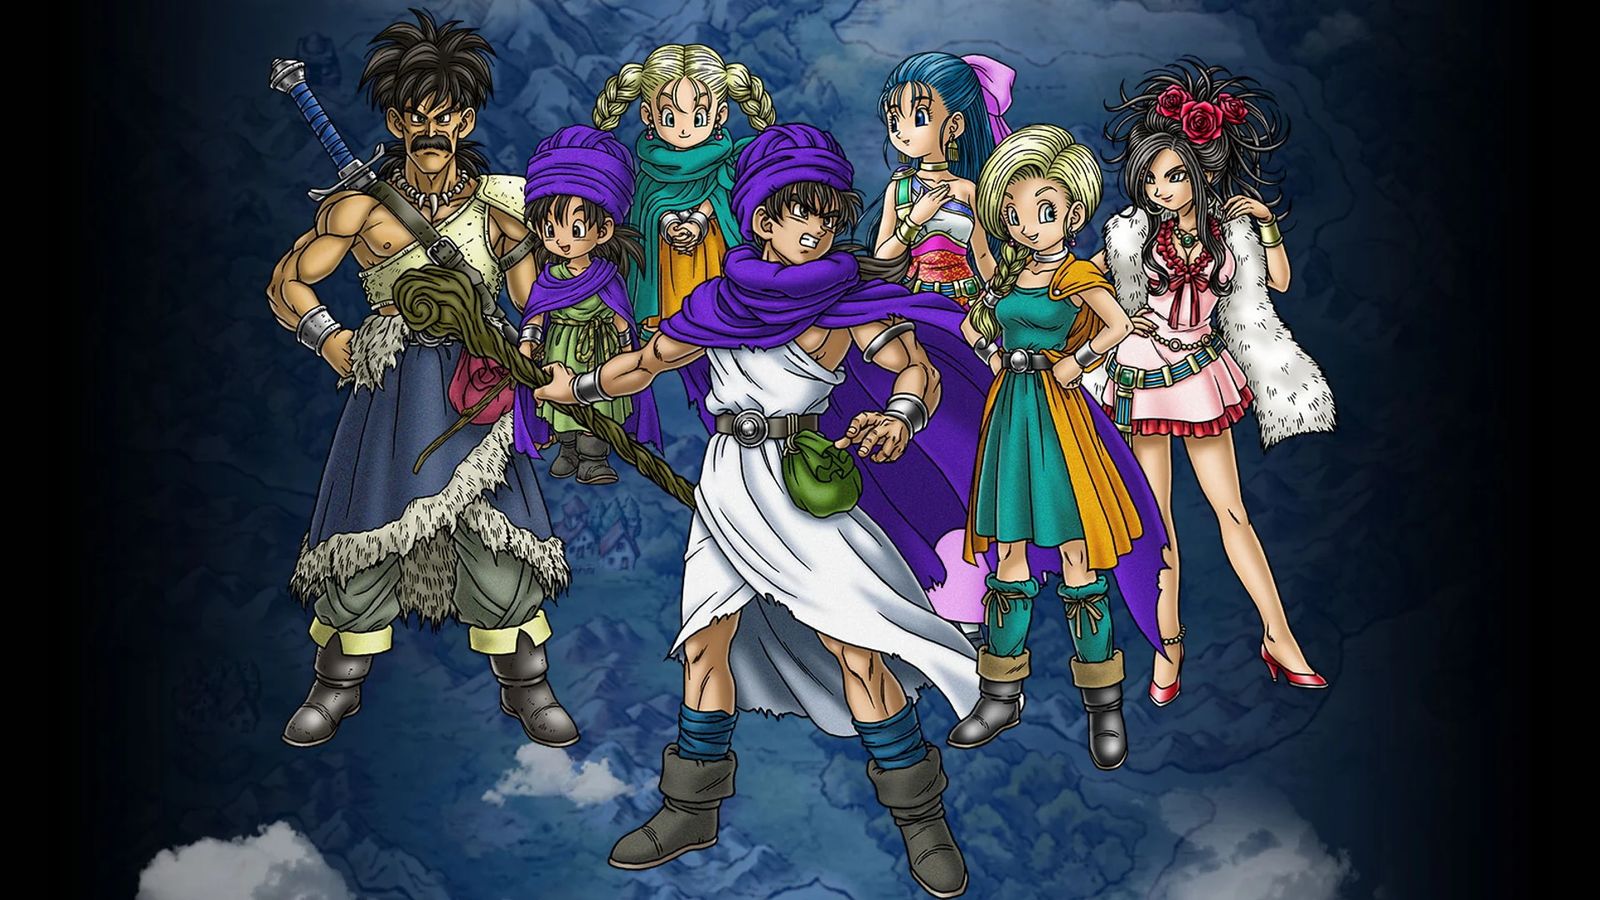 Image showing Dragon Quest 5 characters